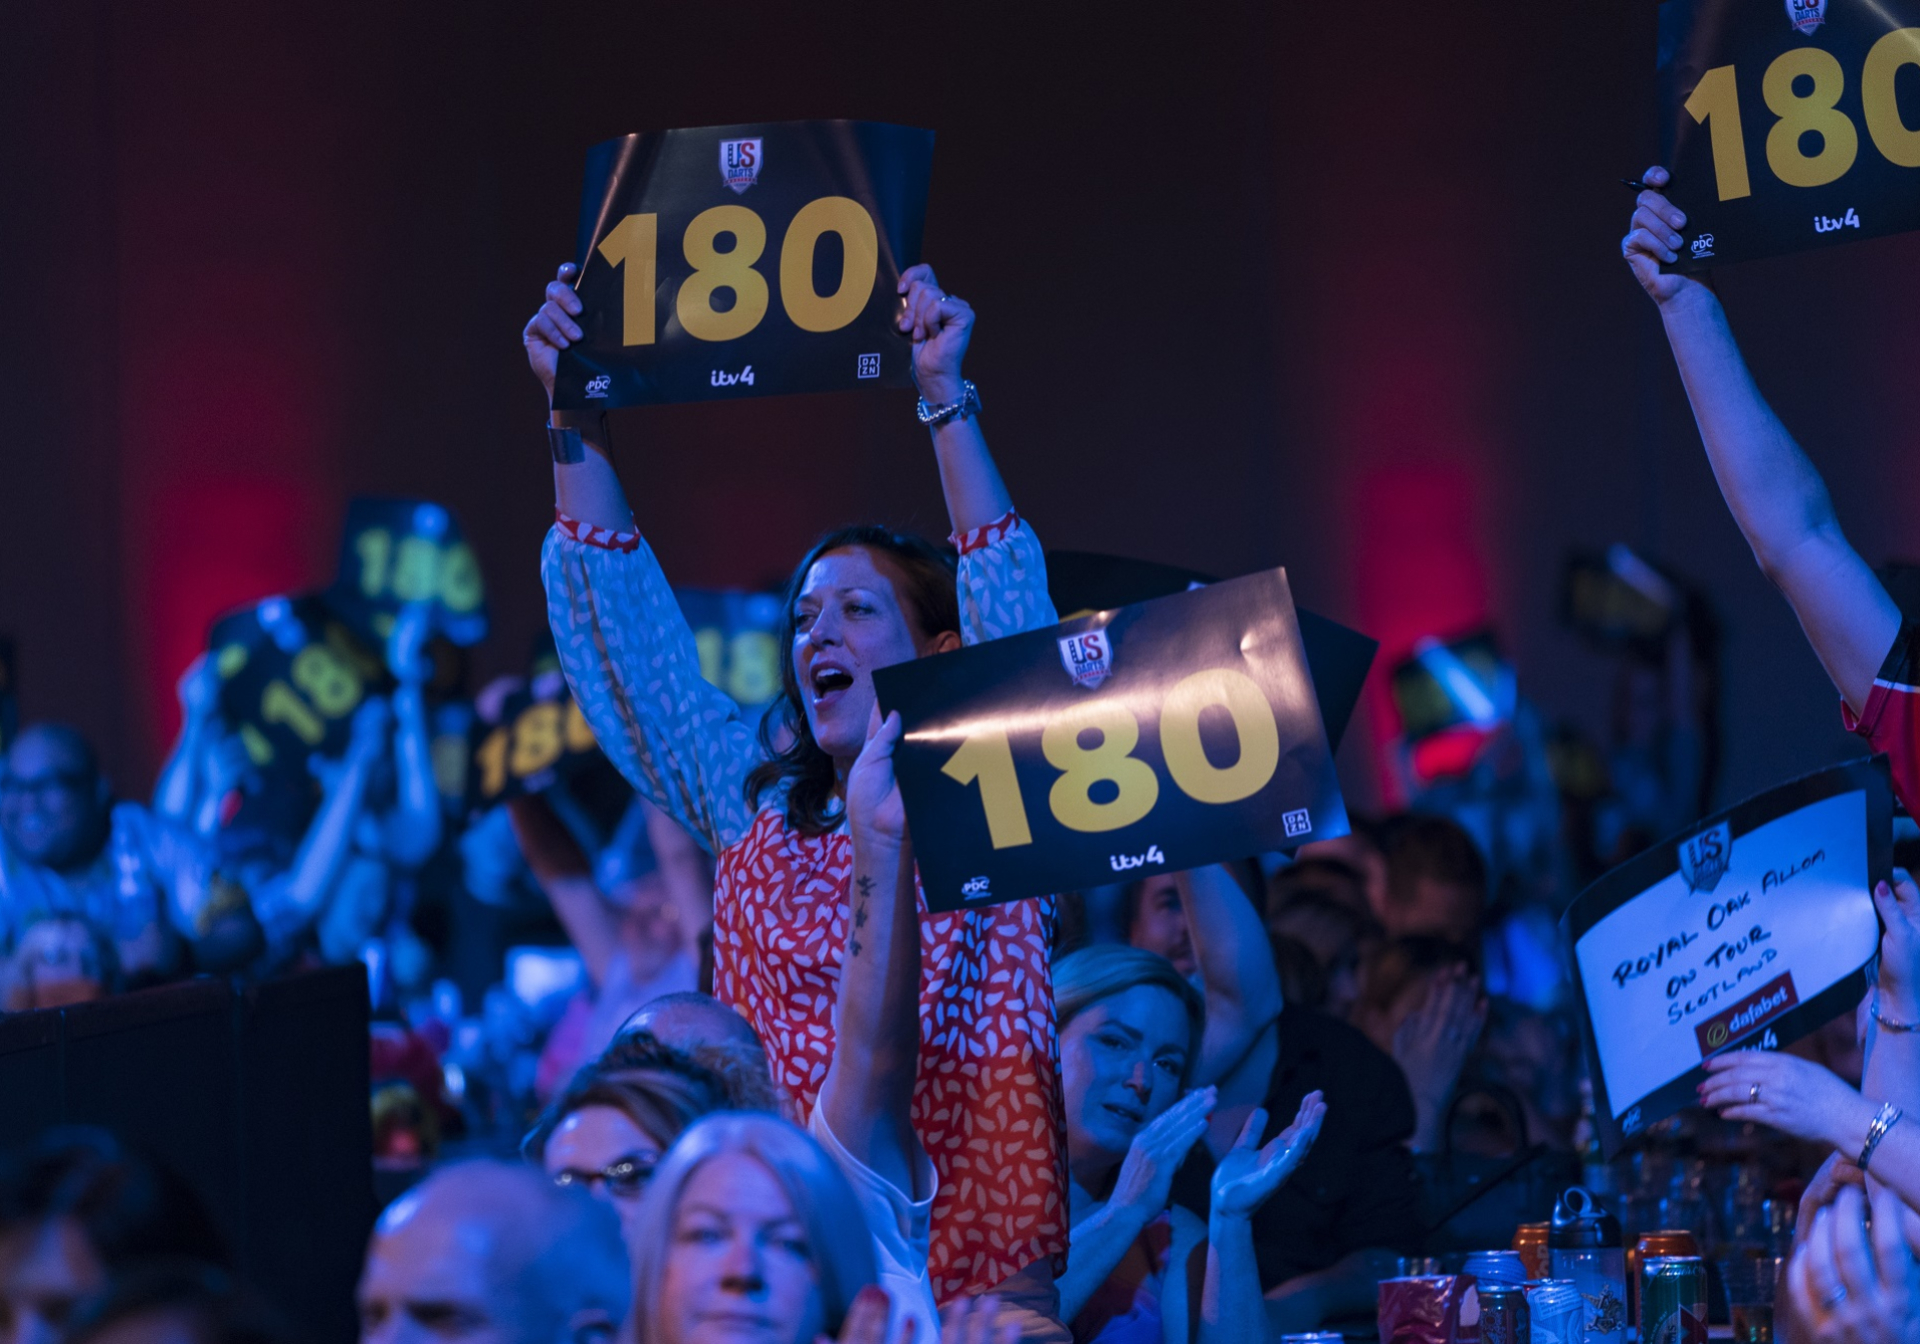 Fans at the Dafabet US Darts Masters